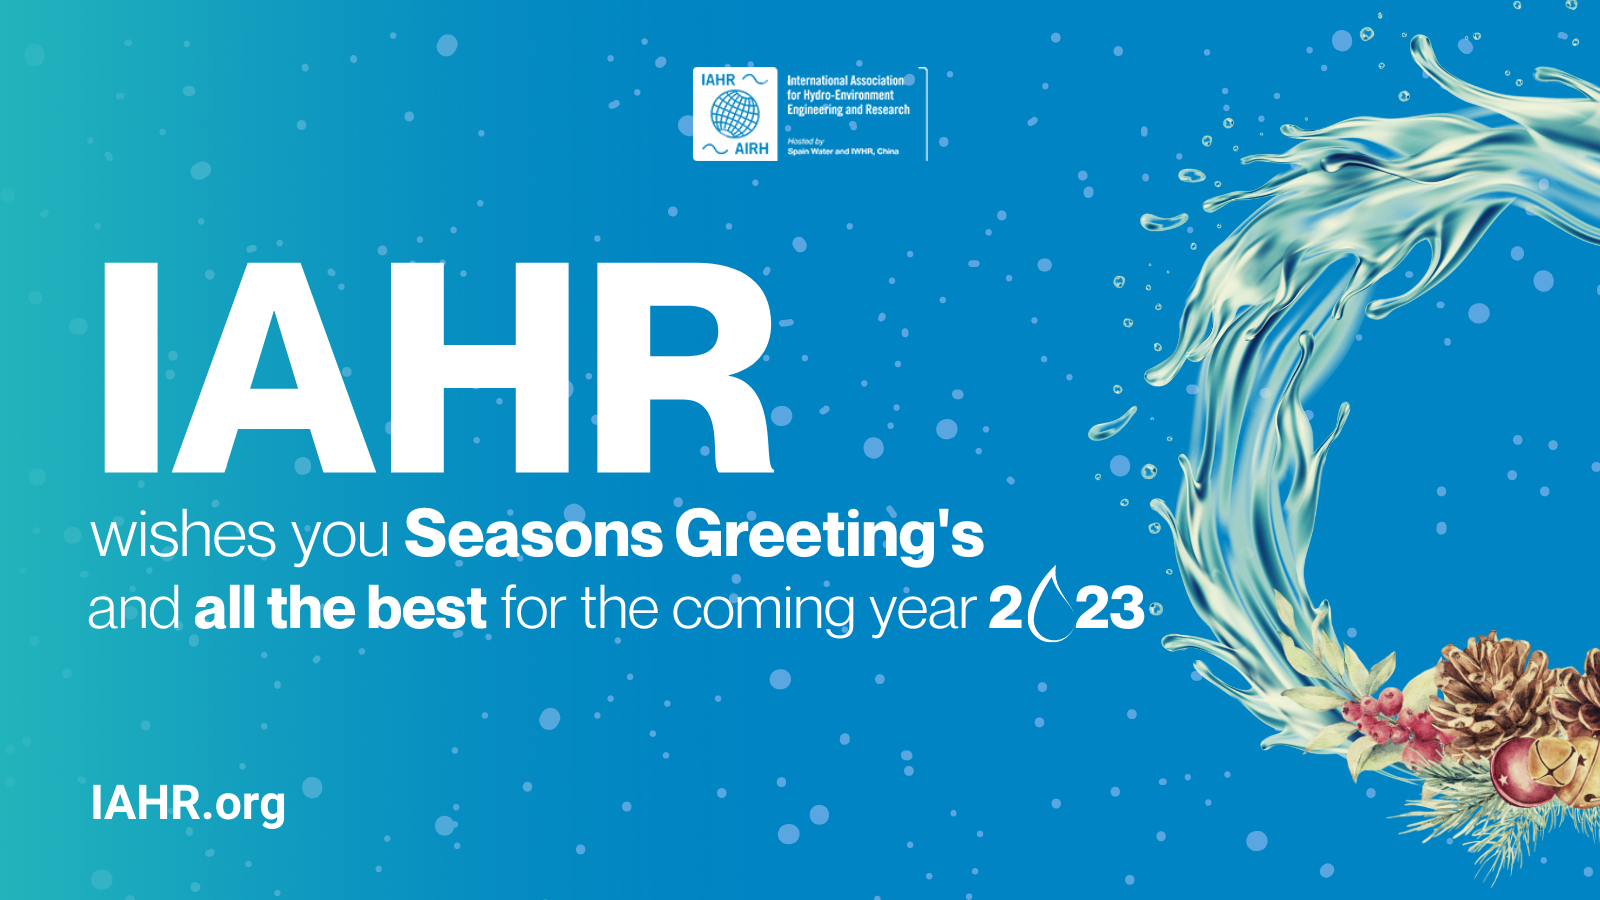 The IAHR Secretariat wishes you Season's Greetings and all the best for the coming year 2023!